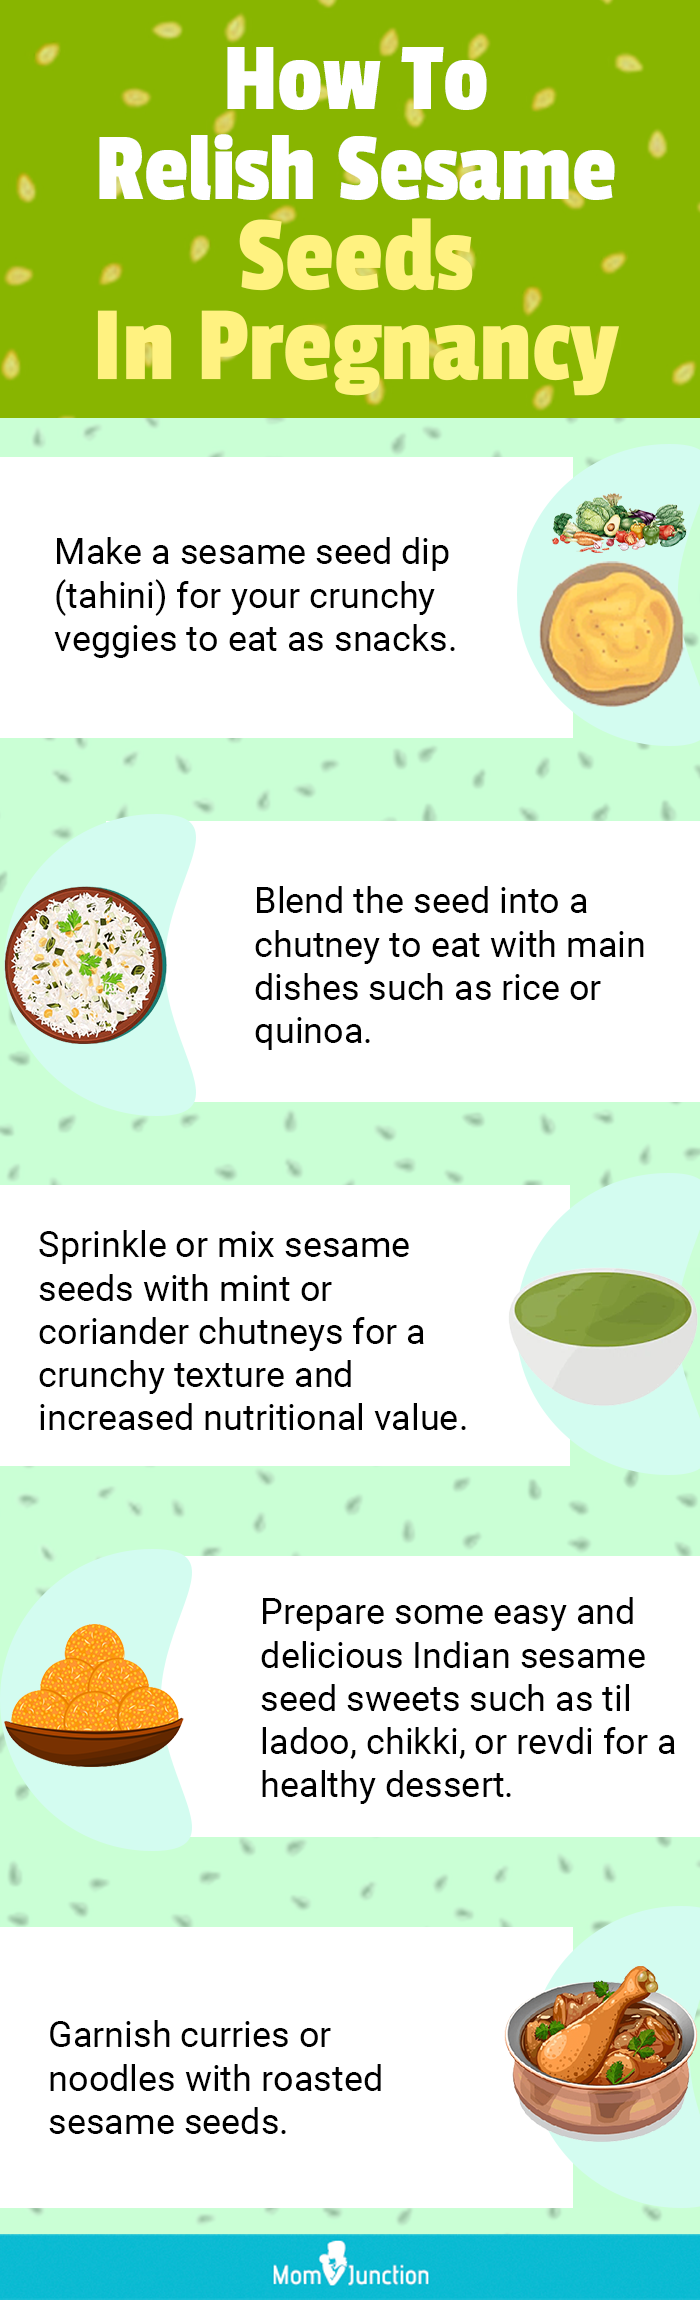 how to relish sesame seeds in pregnancy (infographic)